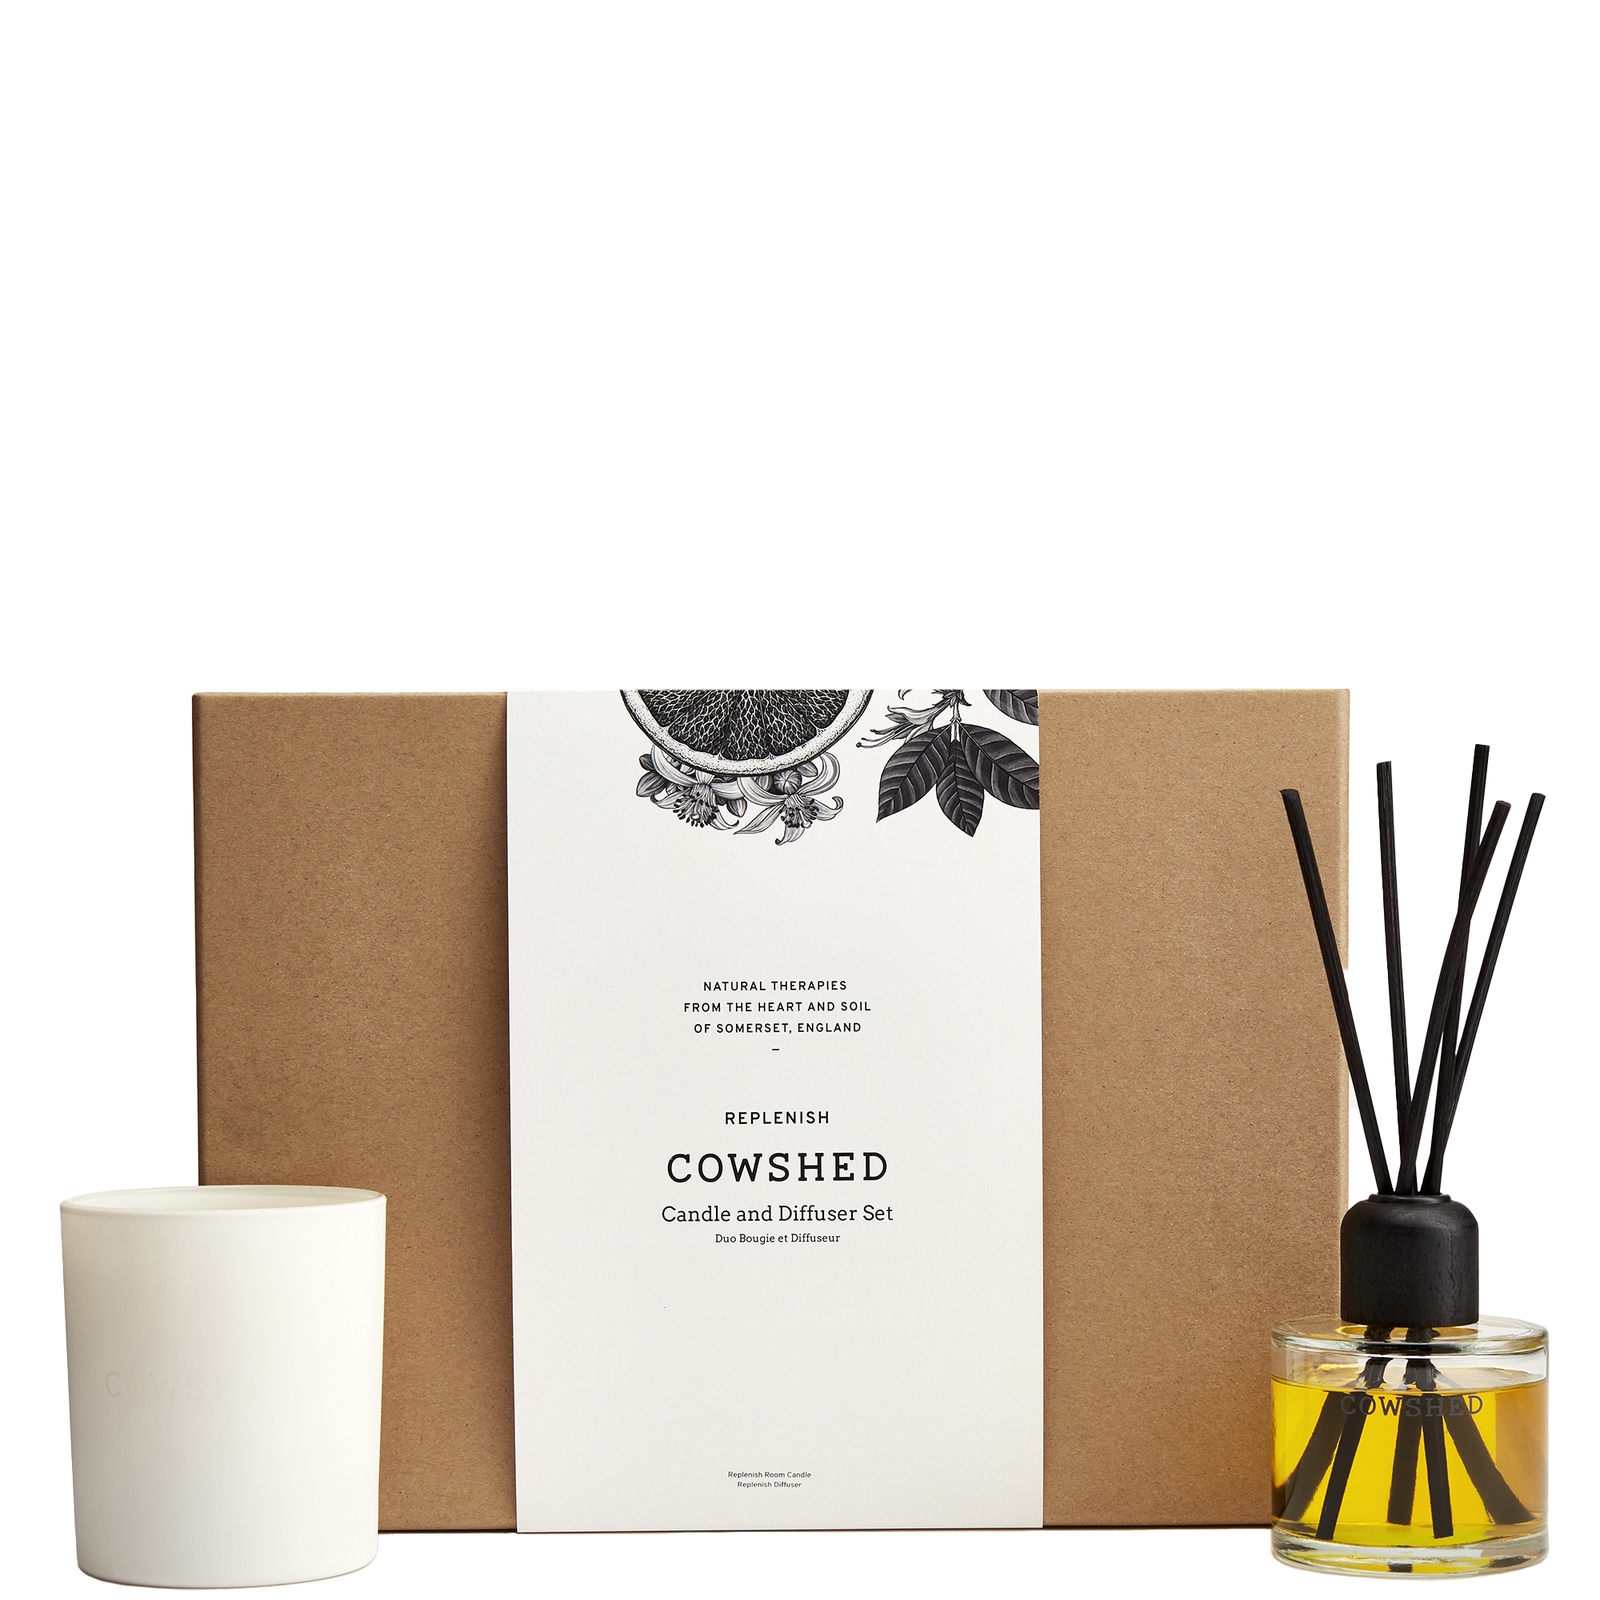 Cowshed Candle And Diffuser Set - Replenish In Multi